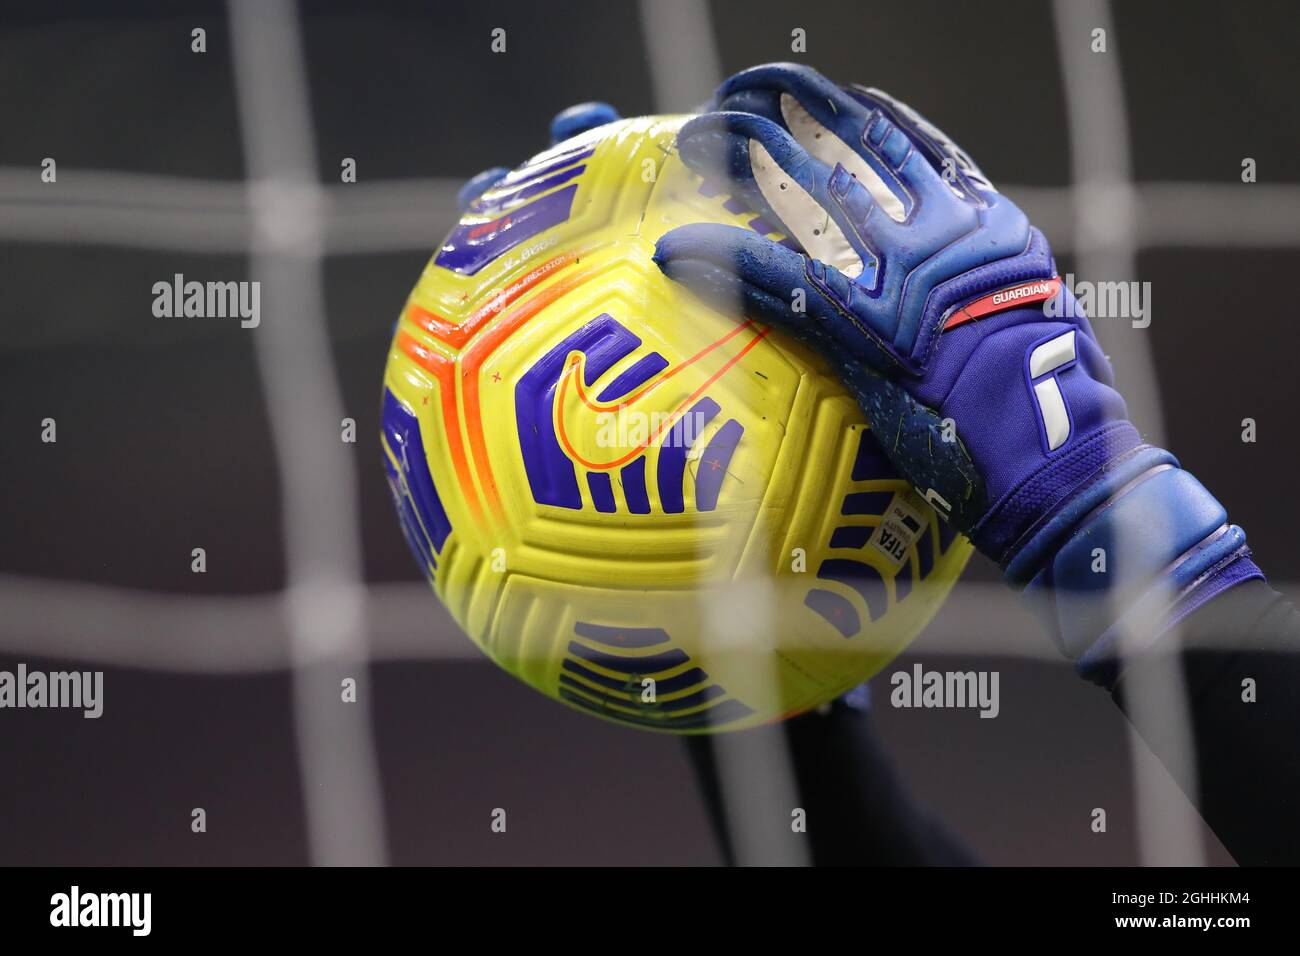 Udinese Calcio goalkeepers weariness Reusch gloves go through their warm up drill prior to the Serie A match at Giuseppe Meazza, Milan. Picture date: 3rd March 2021. Picture credit should read: Jonathan Moscrop/Sportimage via PA Images Stock Photo